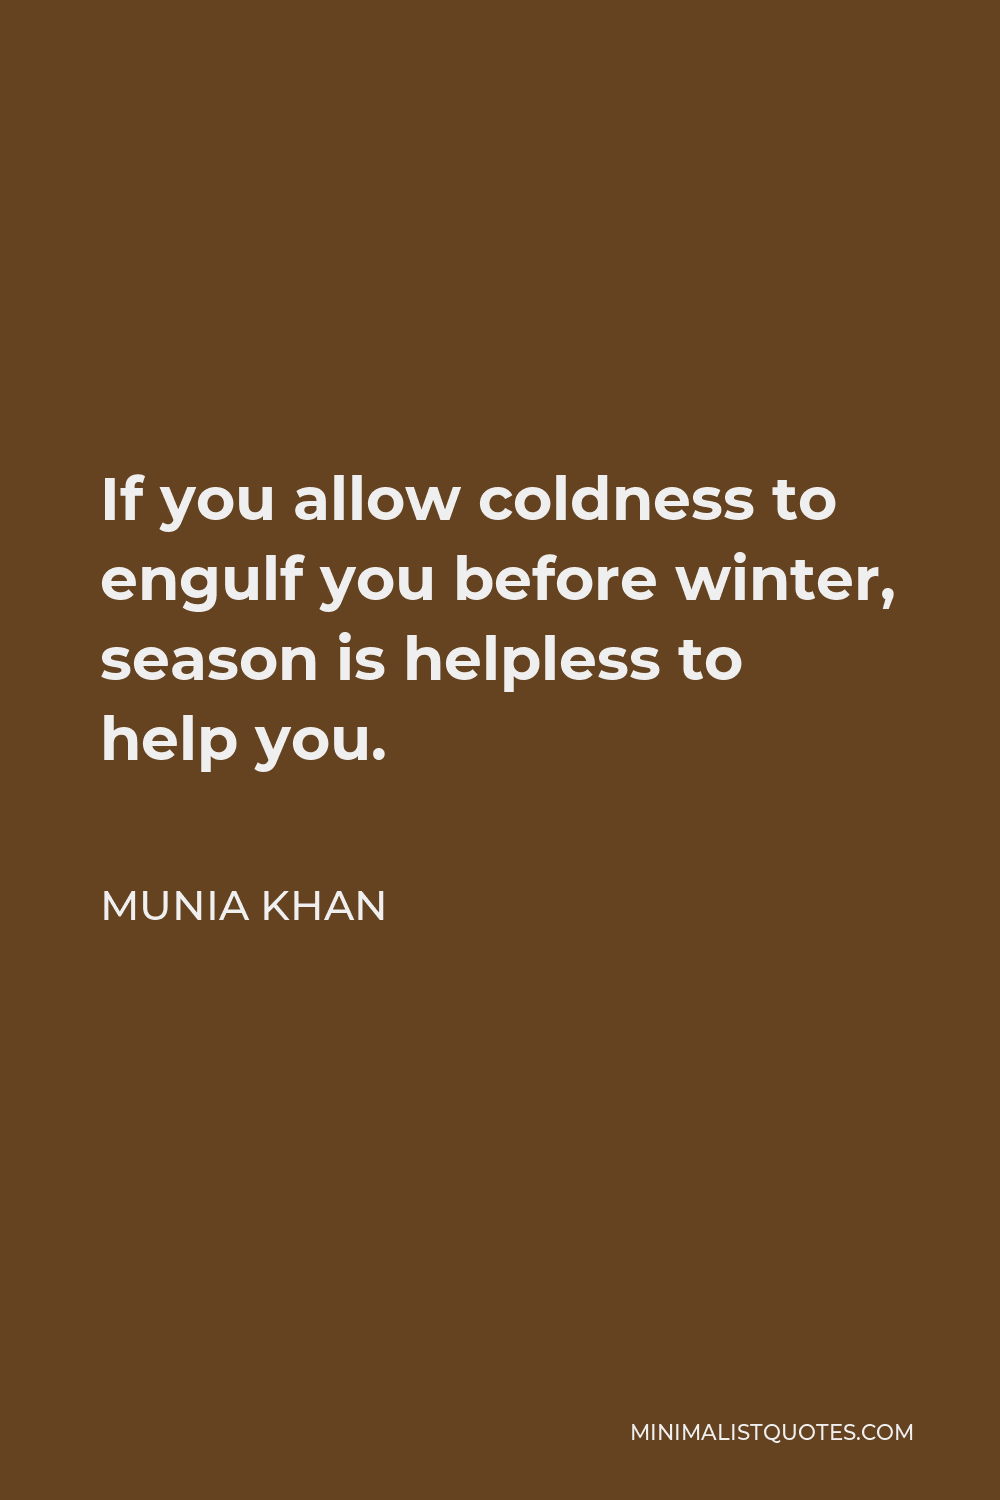 Munia Khan Quote - If you allow coldness to engulf you before winter, season is helpless to help you.